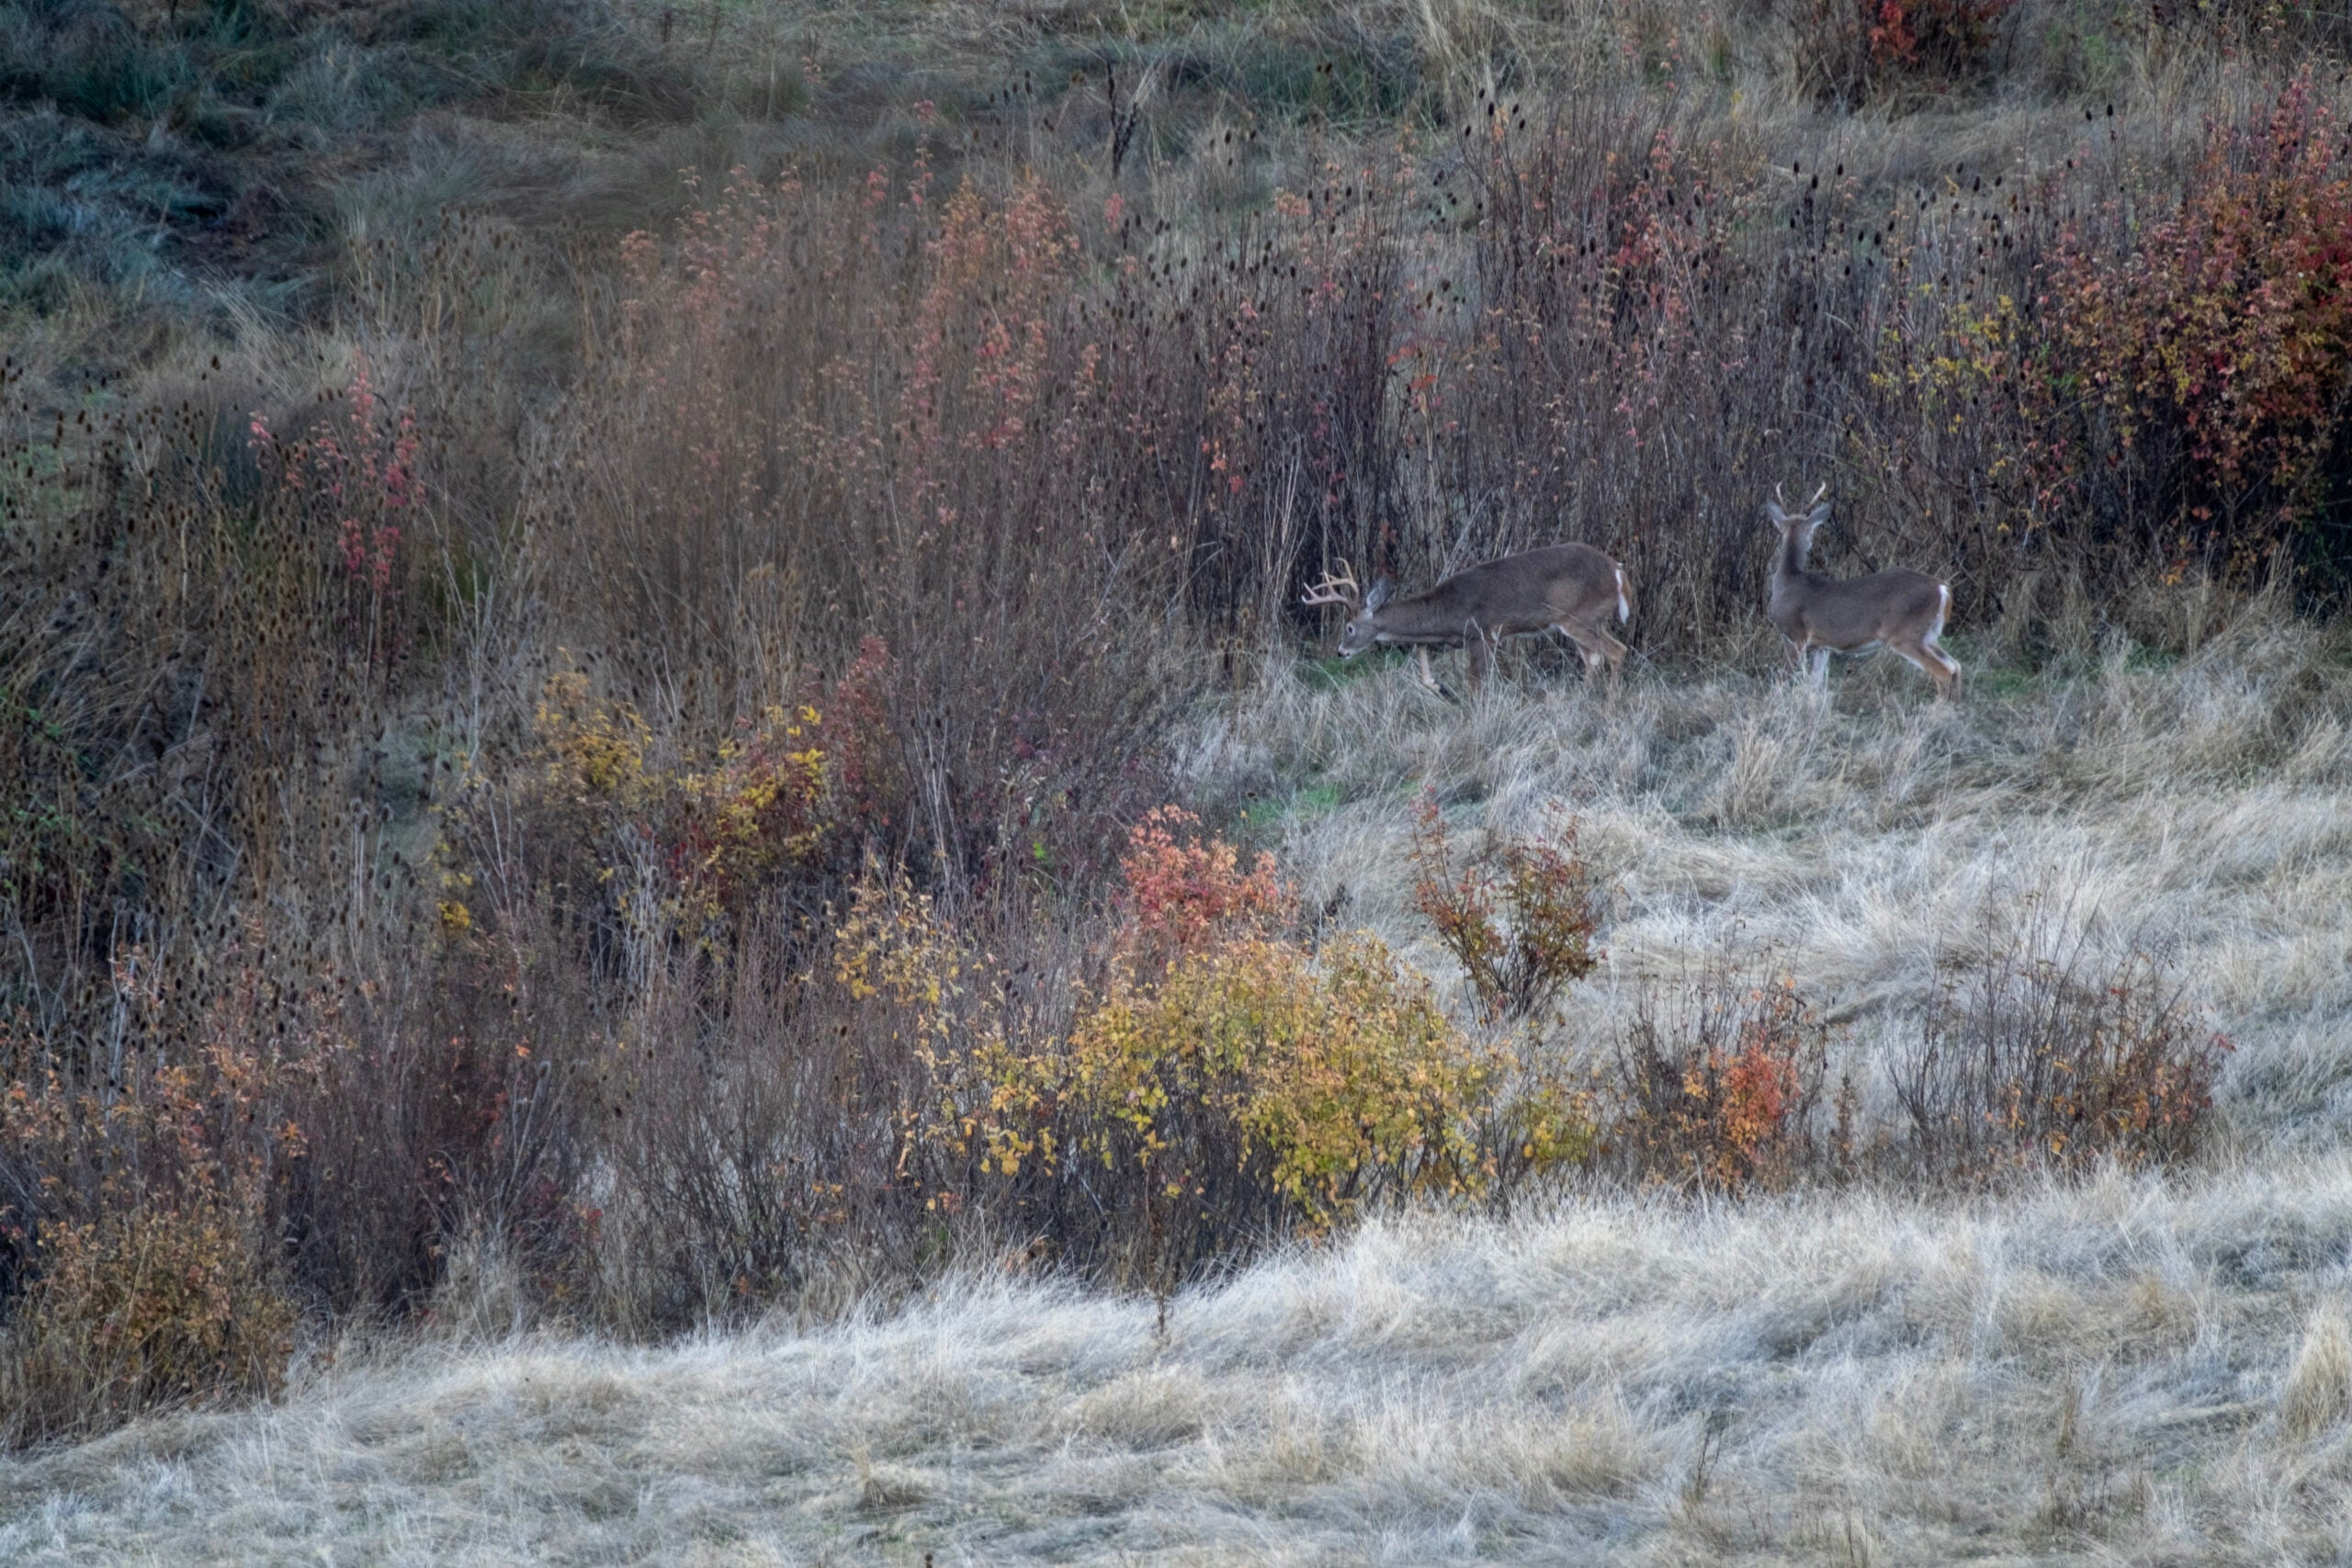 Two Columbian whitetail bucks cross a grassy opening and filter into a patch of brush